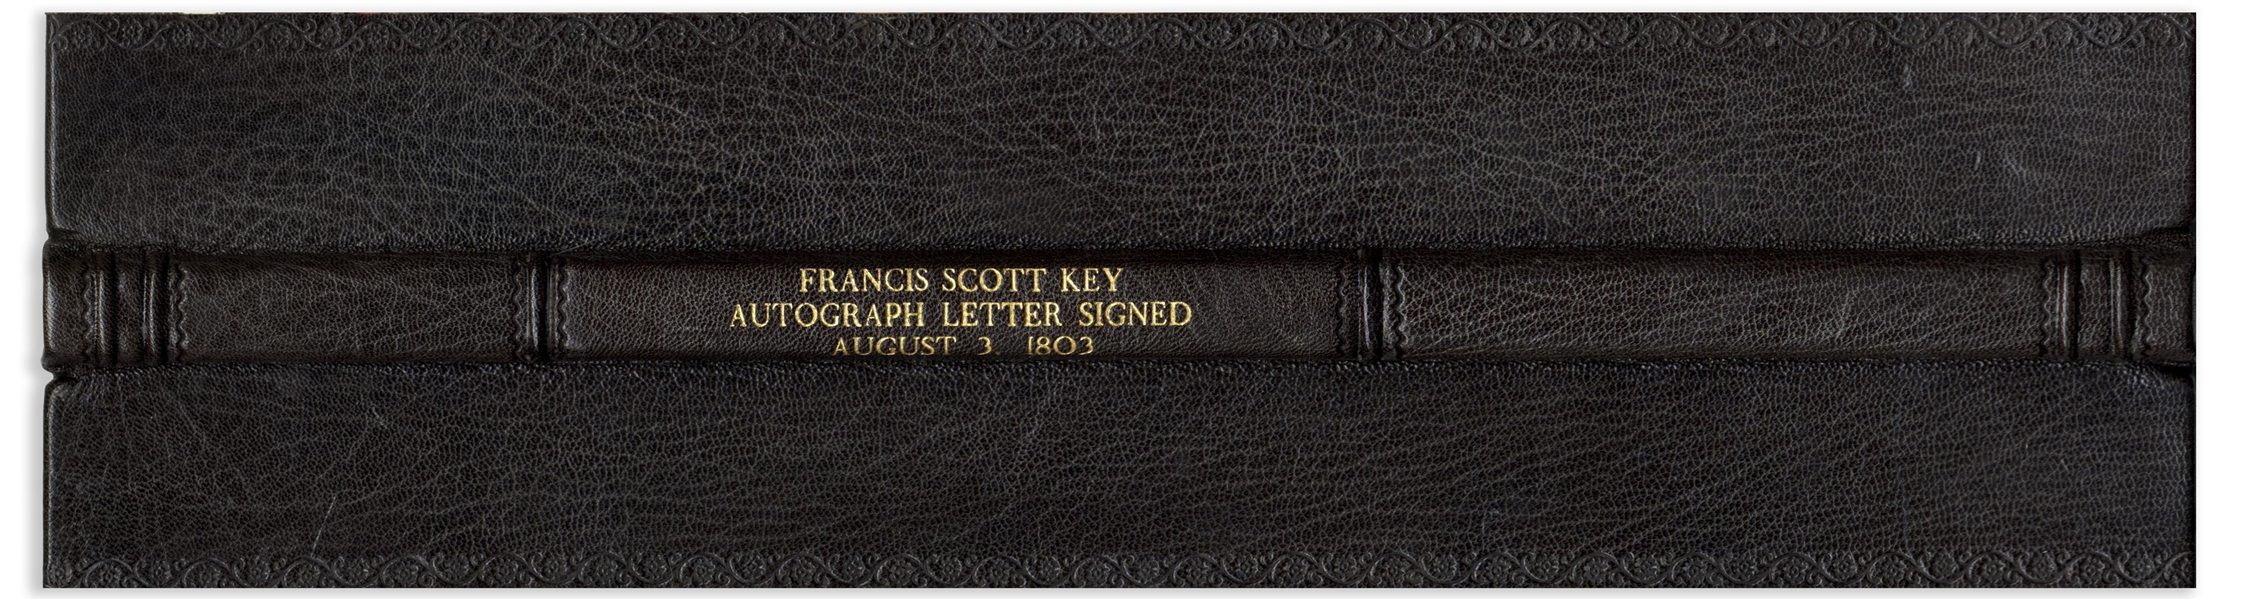 Francis Scott Key Signed Legal Petition From 1803 Defending ''Negro Tom'', Who Was Being Tortured by His Slaveowner -- Petition Written Entirely in Key's Hand